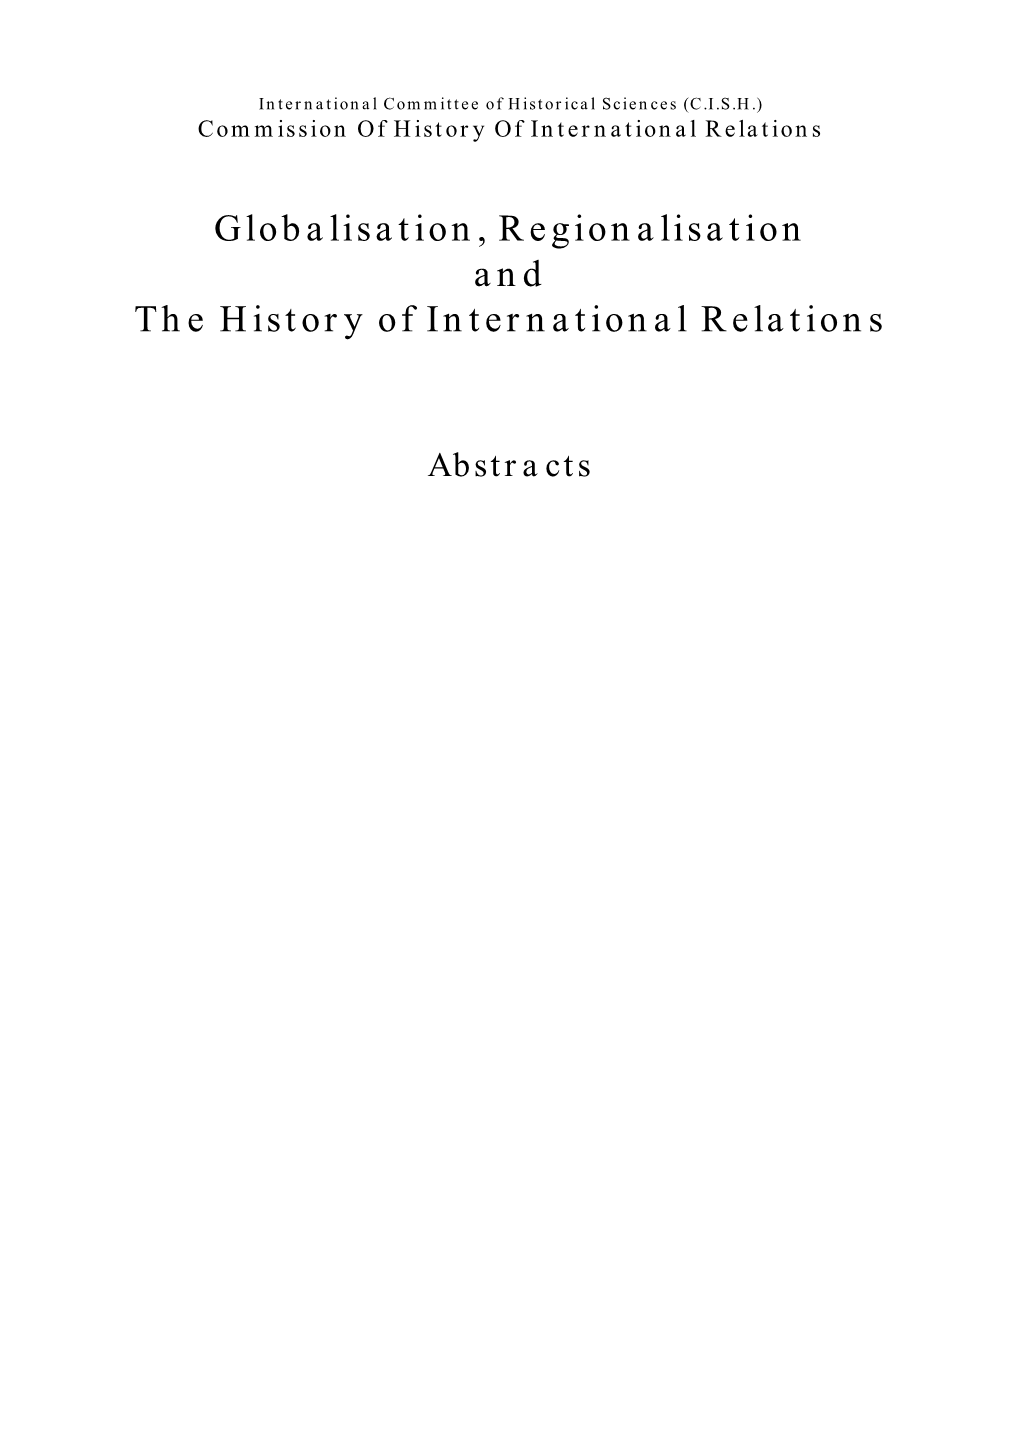 Globalisation, Regionalisation and the History of International Relations